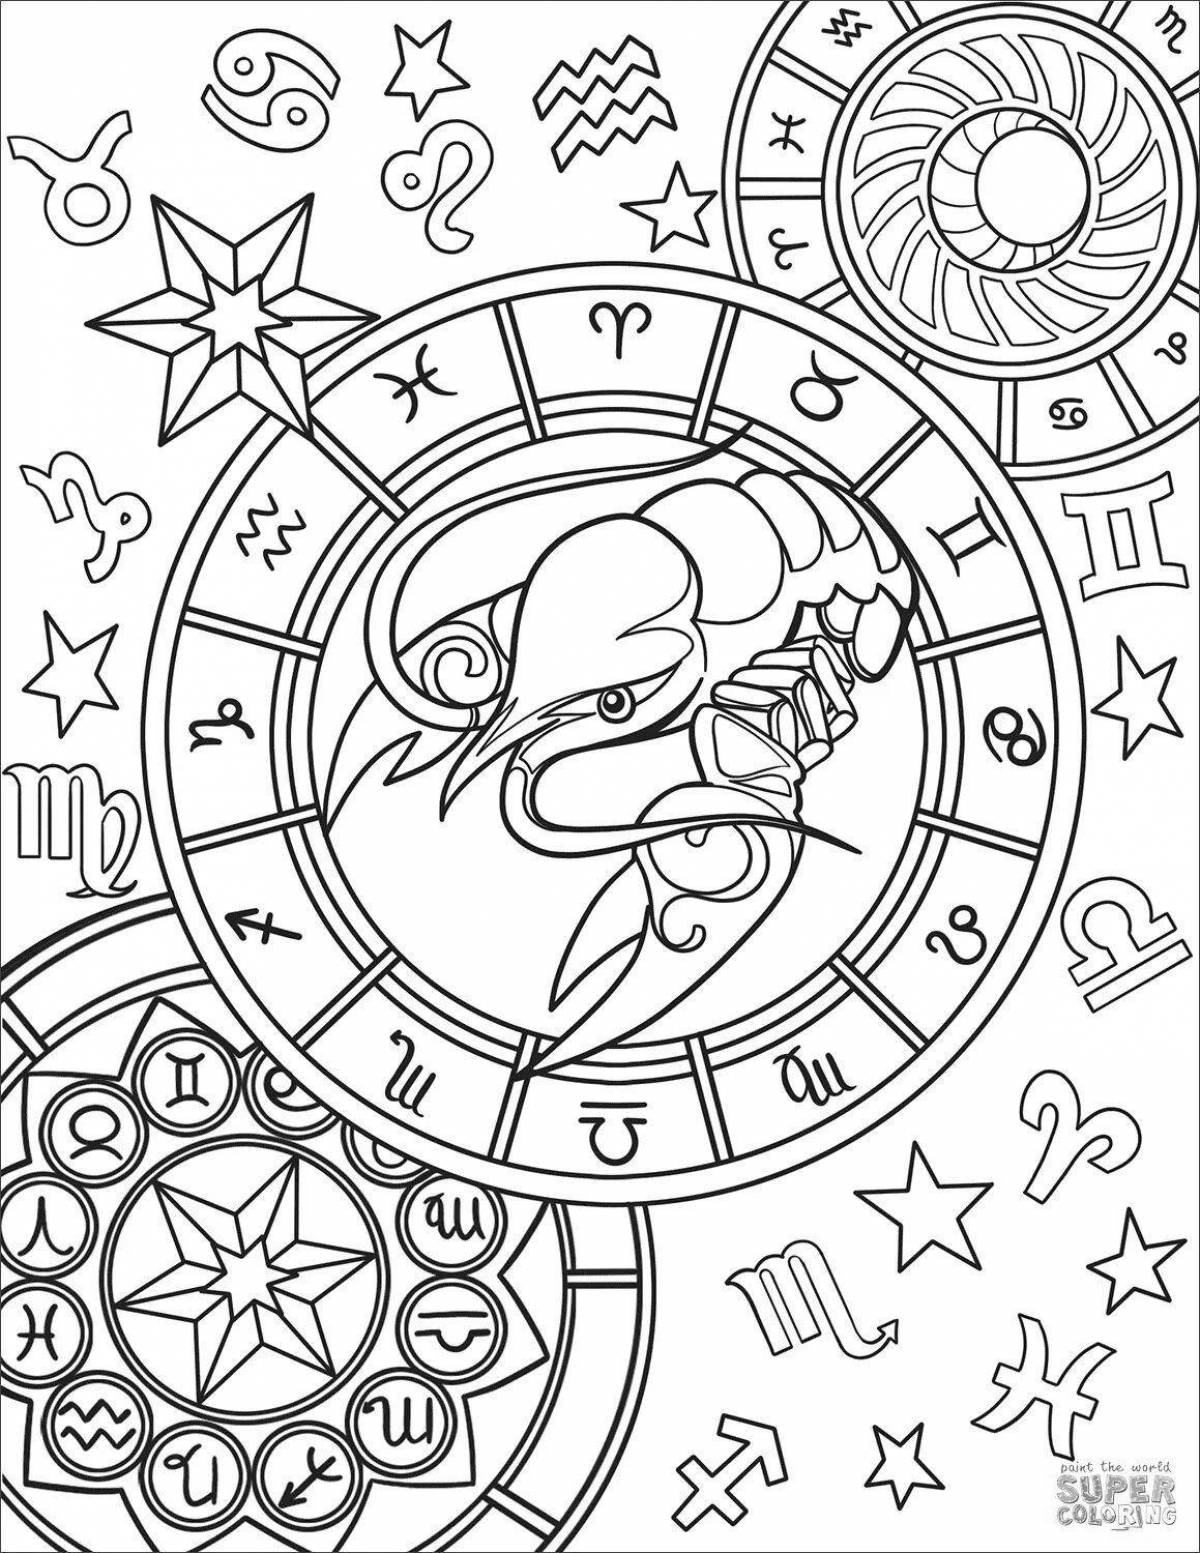 Colorful zodiac signs coloring pages for kids to relax